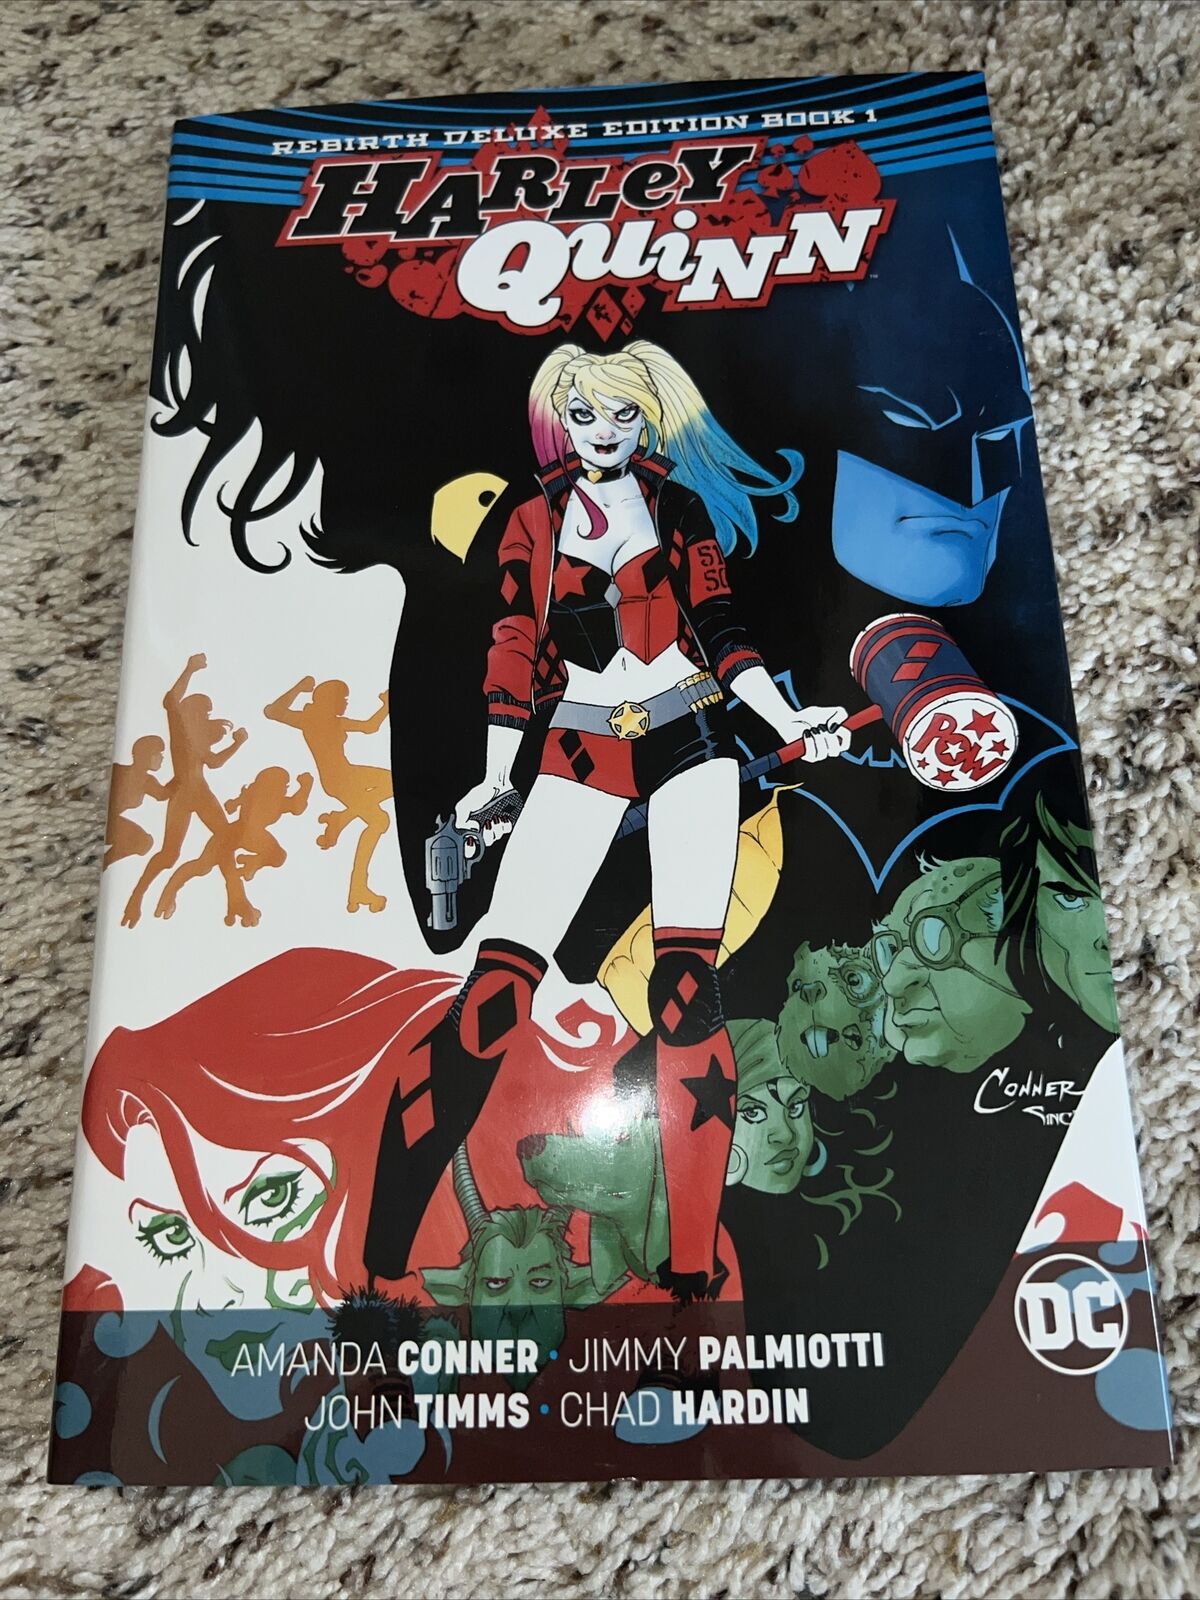 Harley Quinn Rebirth Deluxe Edition Book 1 New DC Comics HC Hardcover